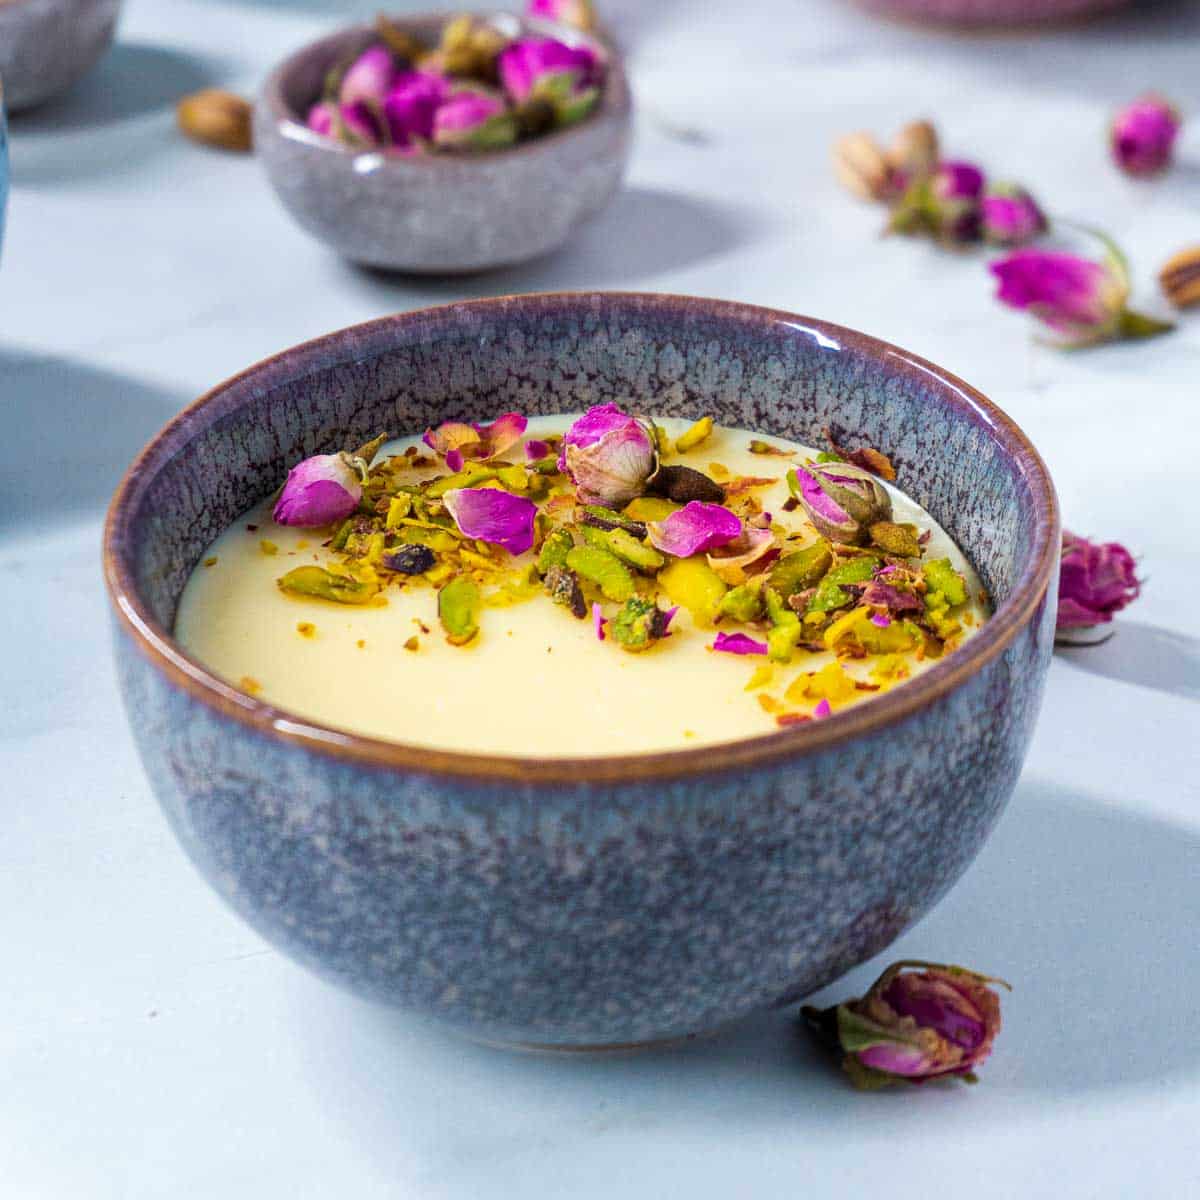 A blue bowl filled with mahalabia, a milk pudding, decorated with pistachios and edible flowers.